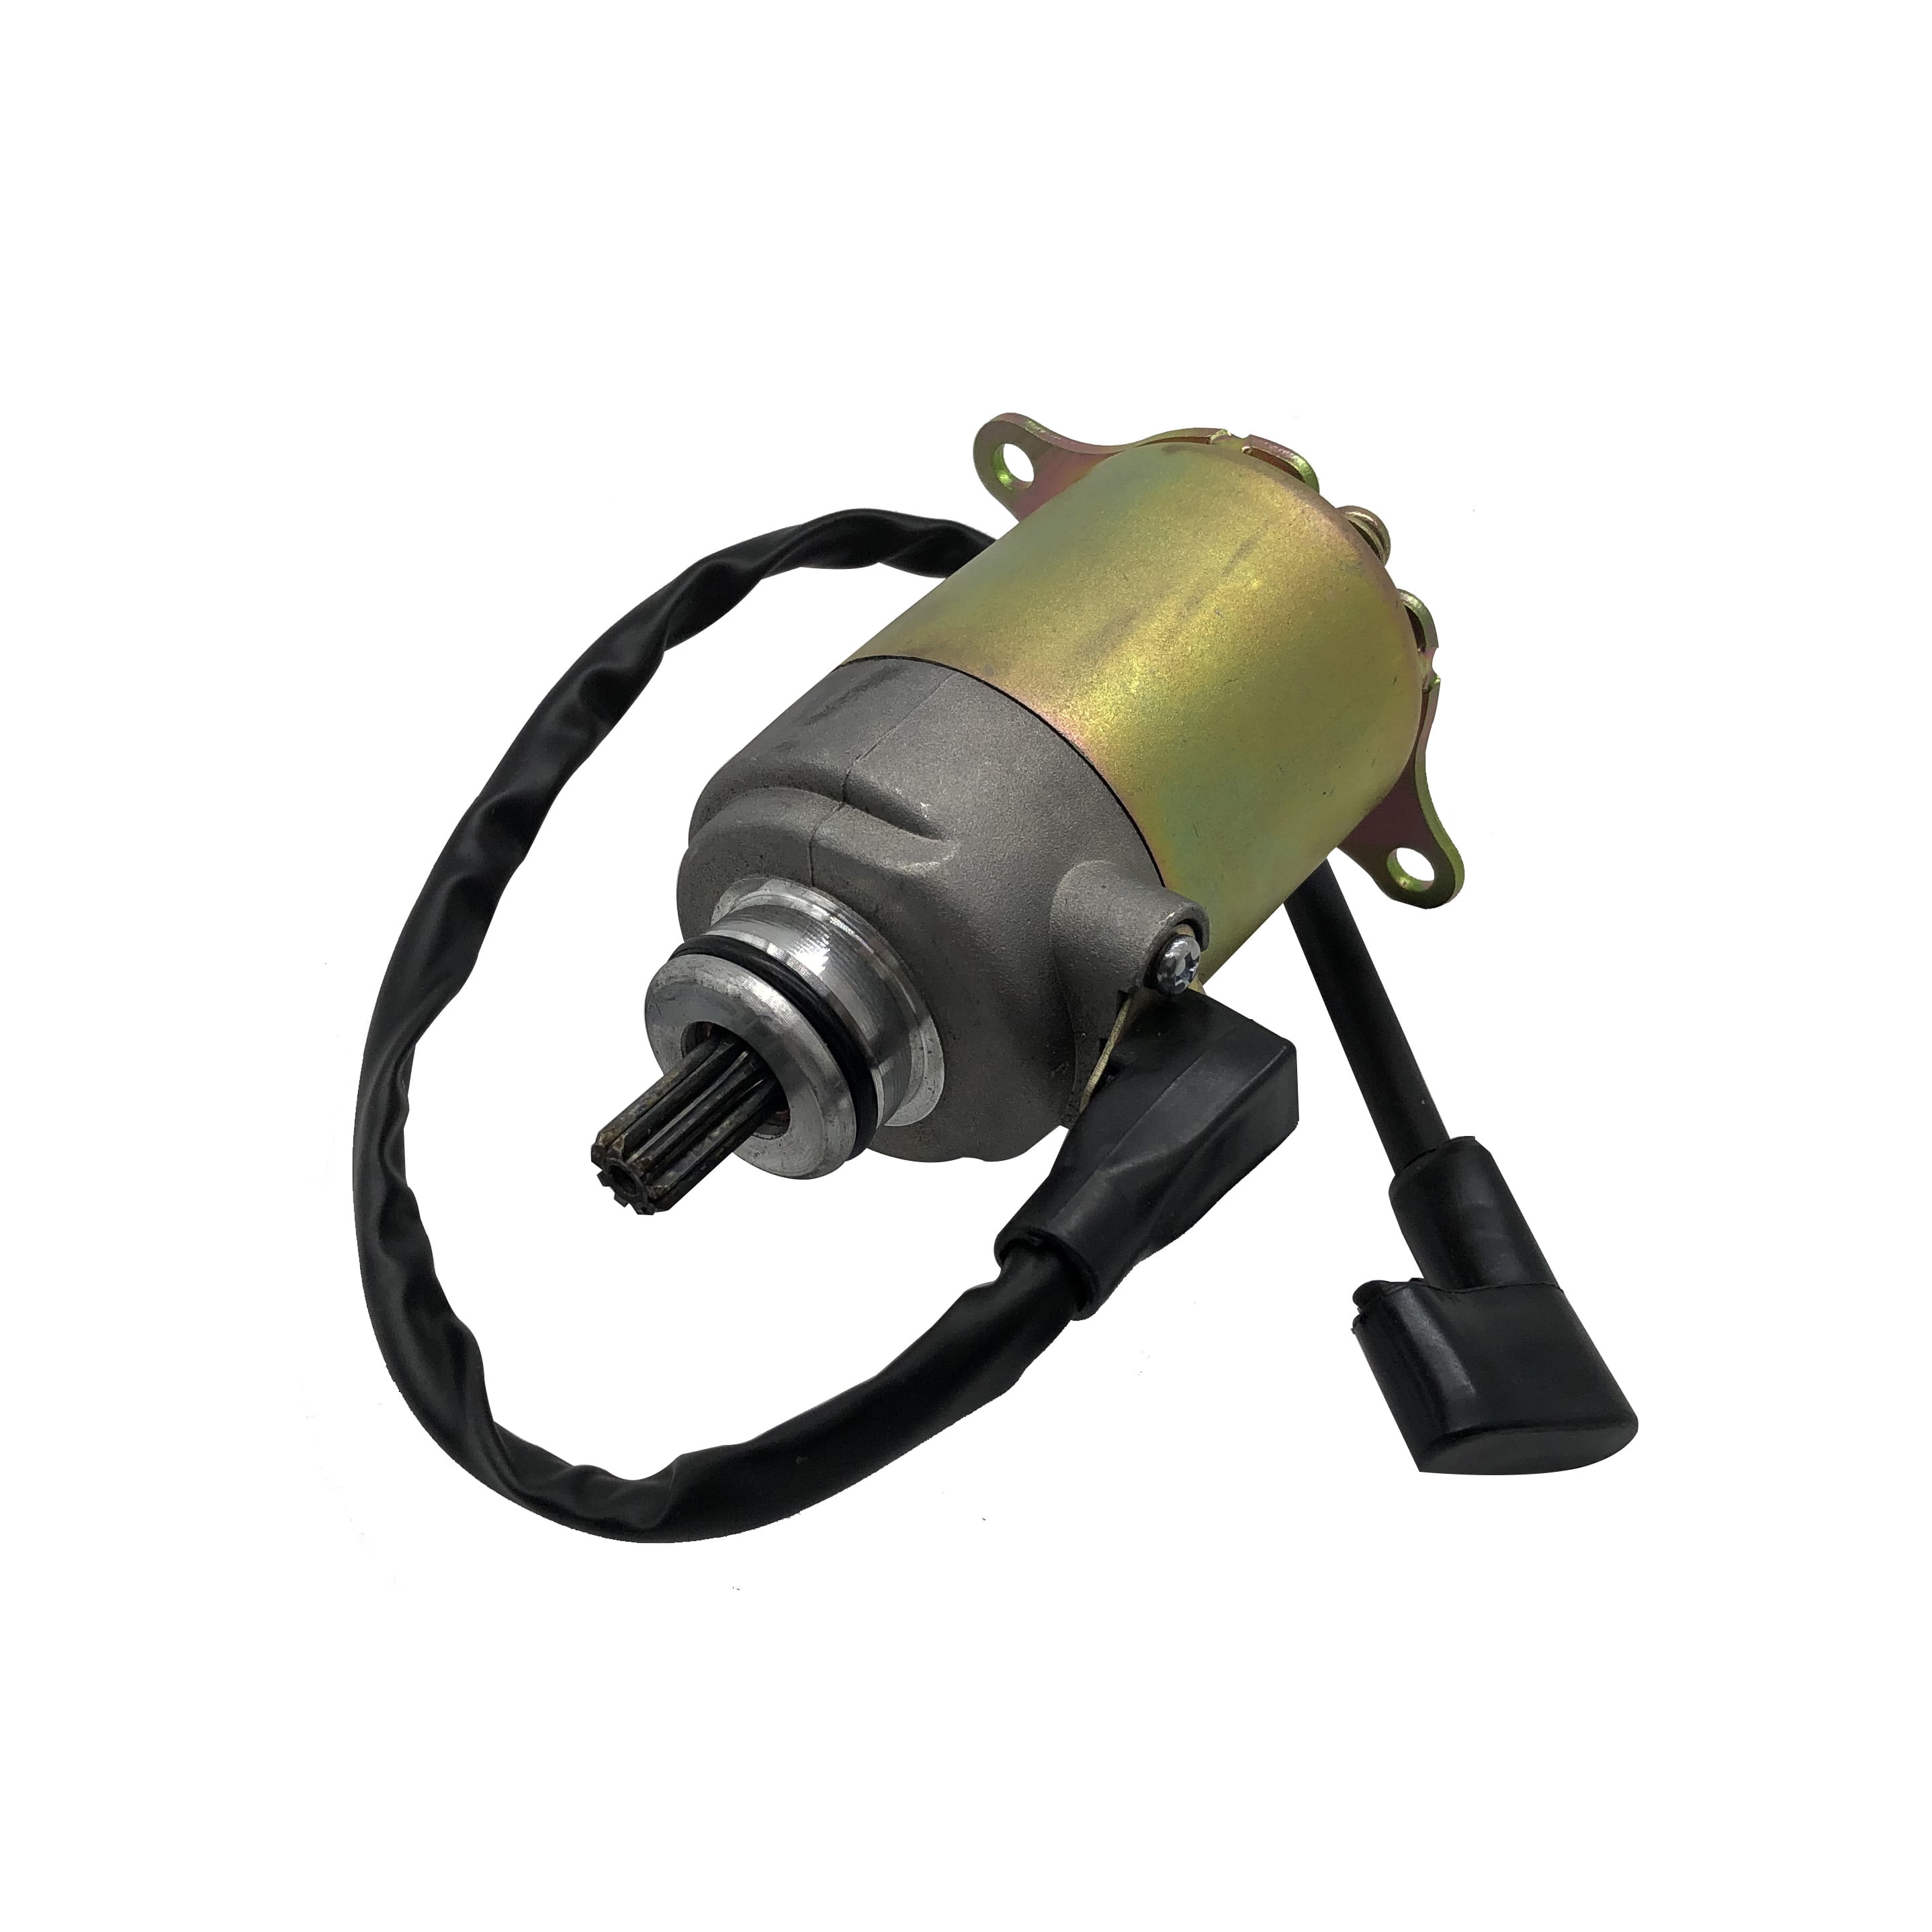 ATVS 150cc STARTER MOTOR FOR CHINESE SCOOTERS AND KARTS WITH 150cc GY6 MOTORS 